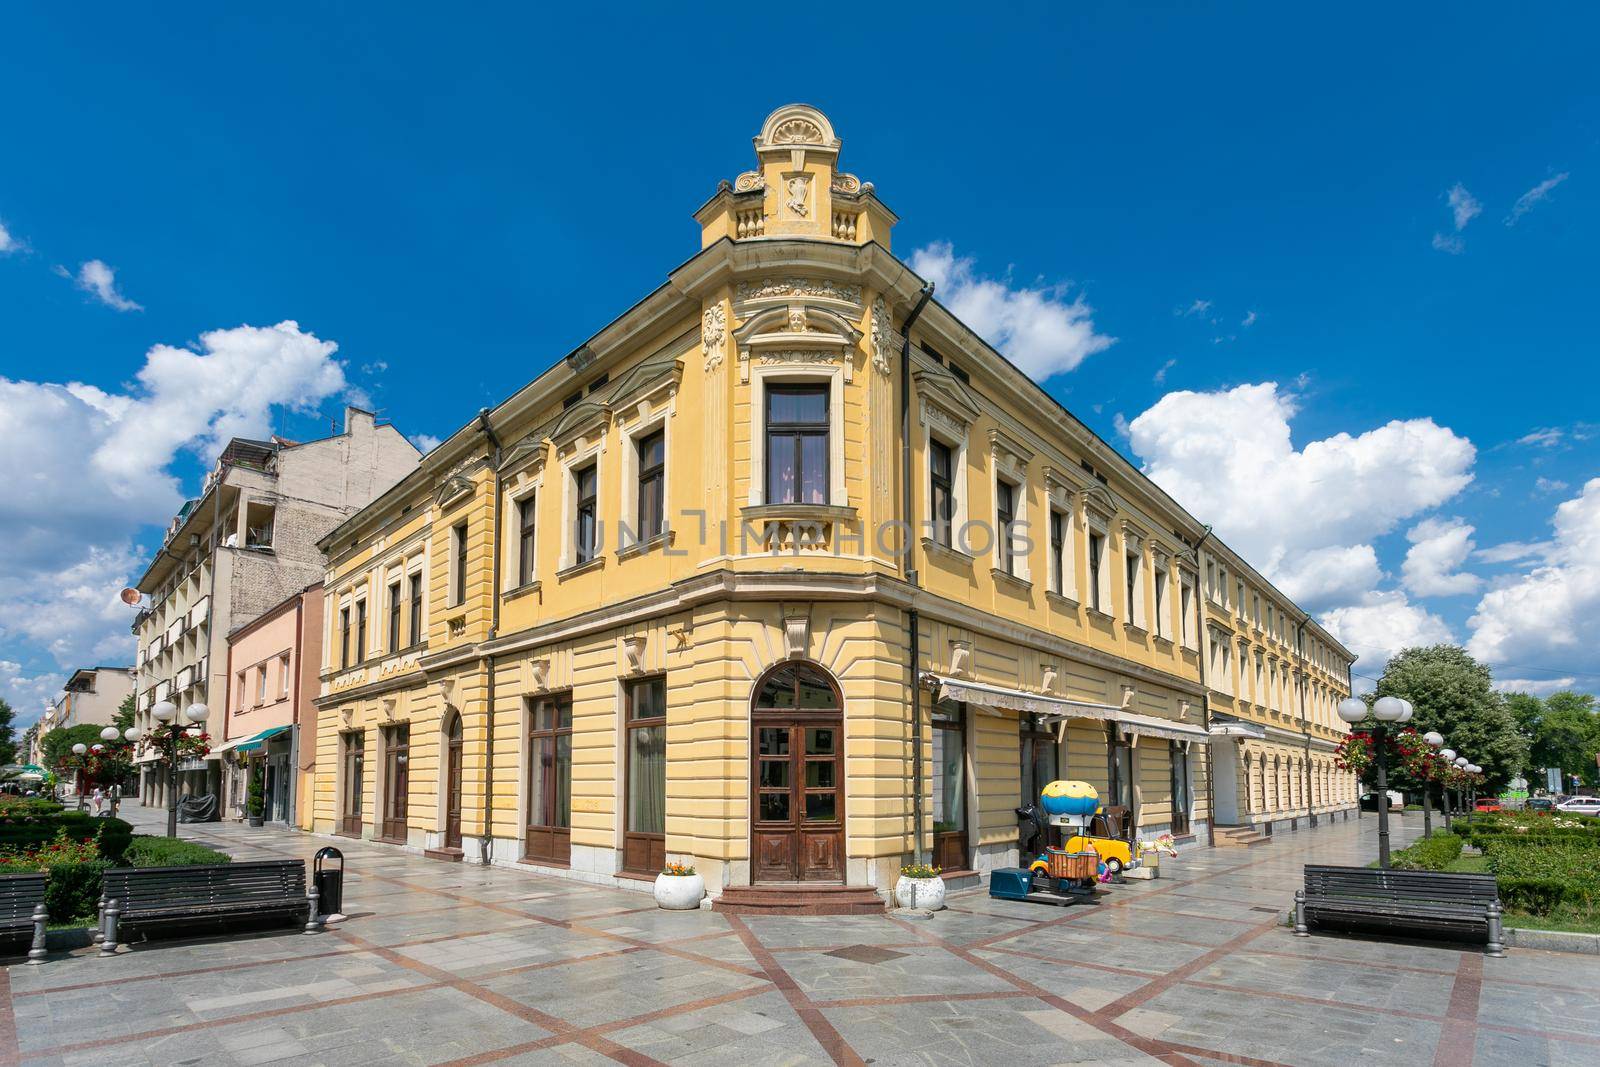 Grand Hotel - a famous building in the center of the pedestrian and shopping zone in Valjevo by adamr